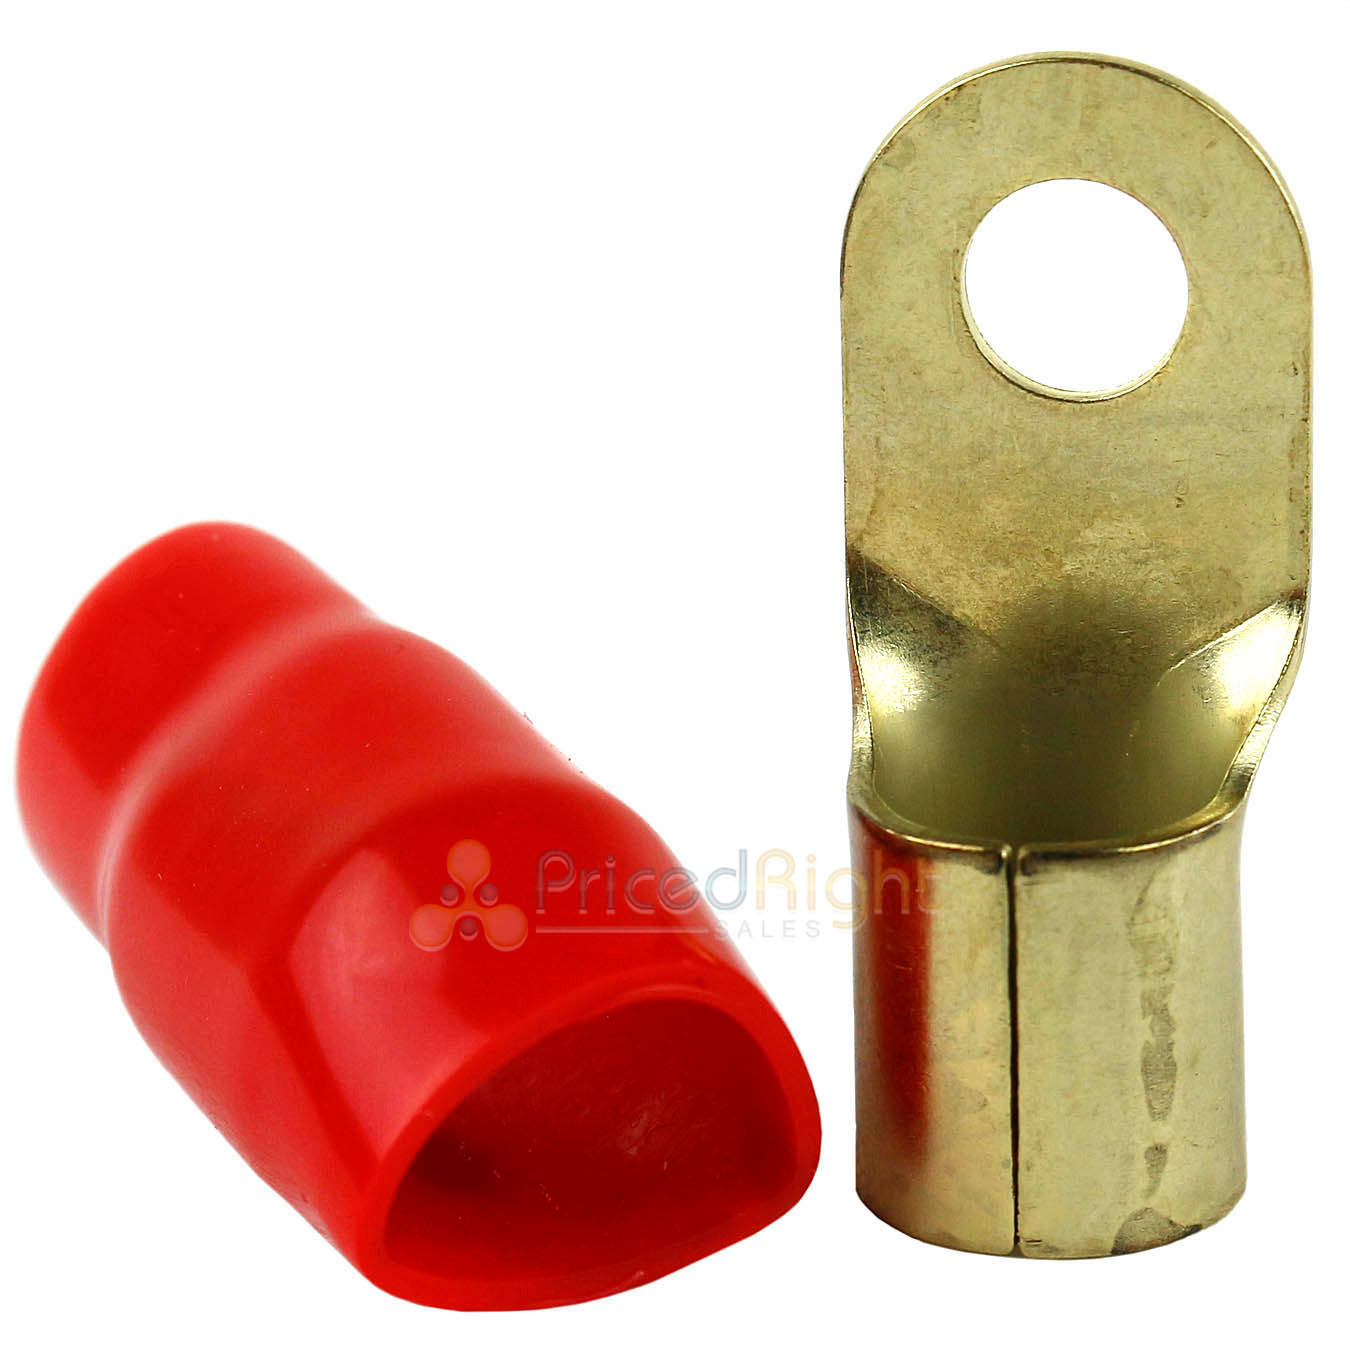 Bullz Audio Ring Terminals 1/0 Gauge 5/16" Hole Gold Plated Red 10 Pack BRT0R